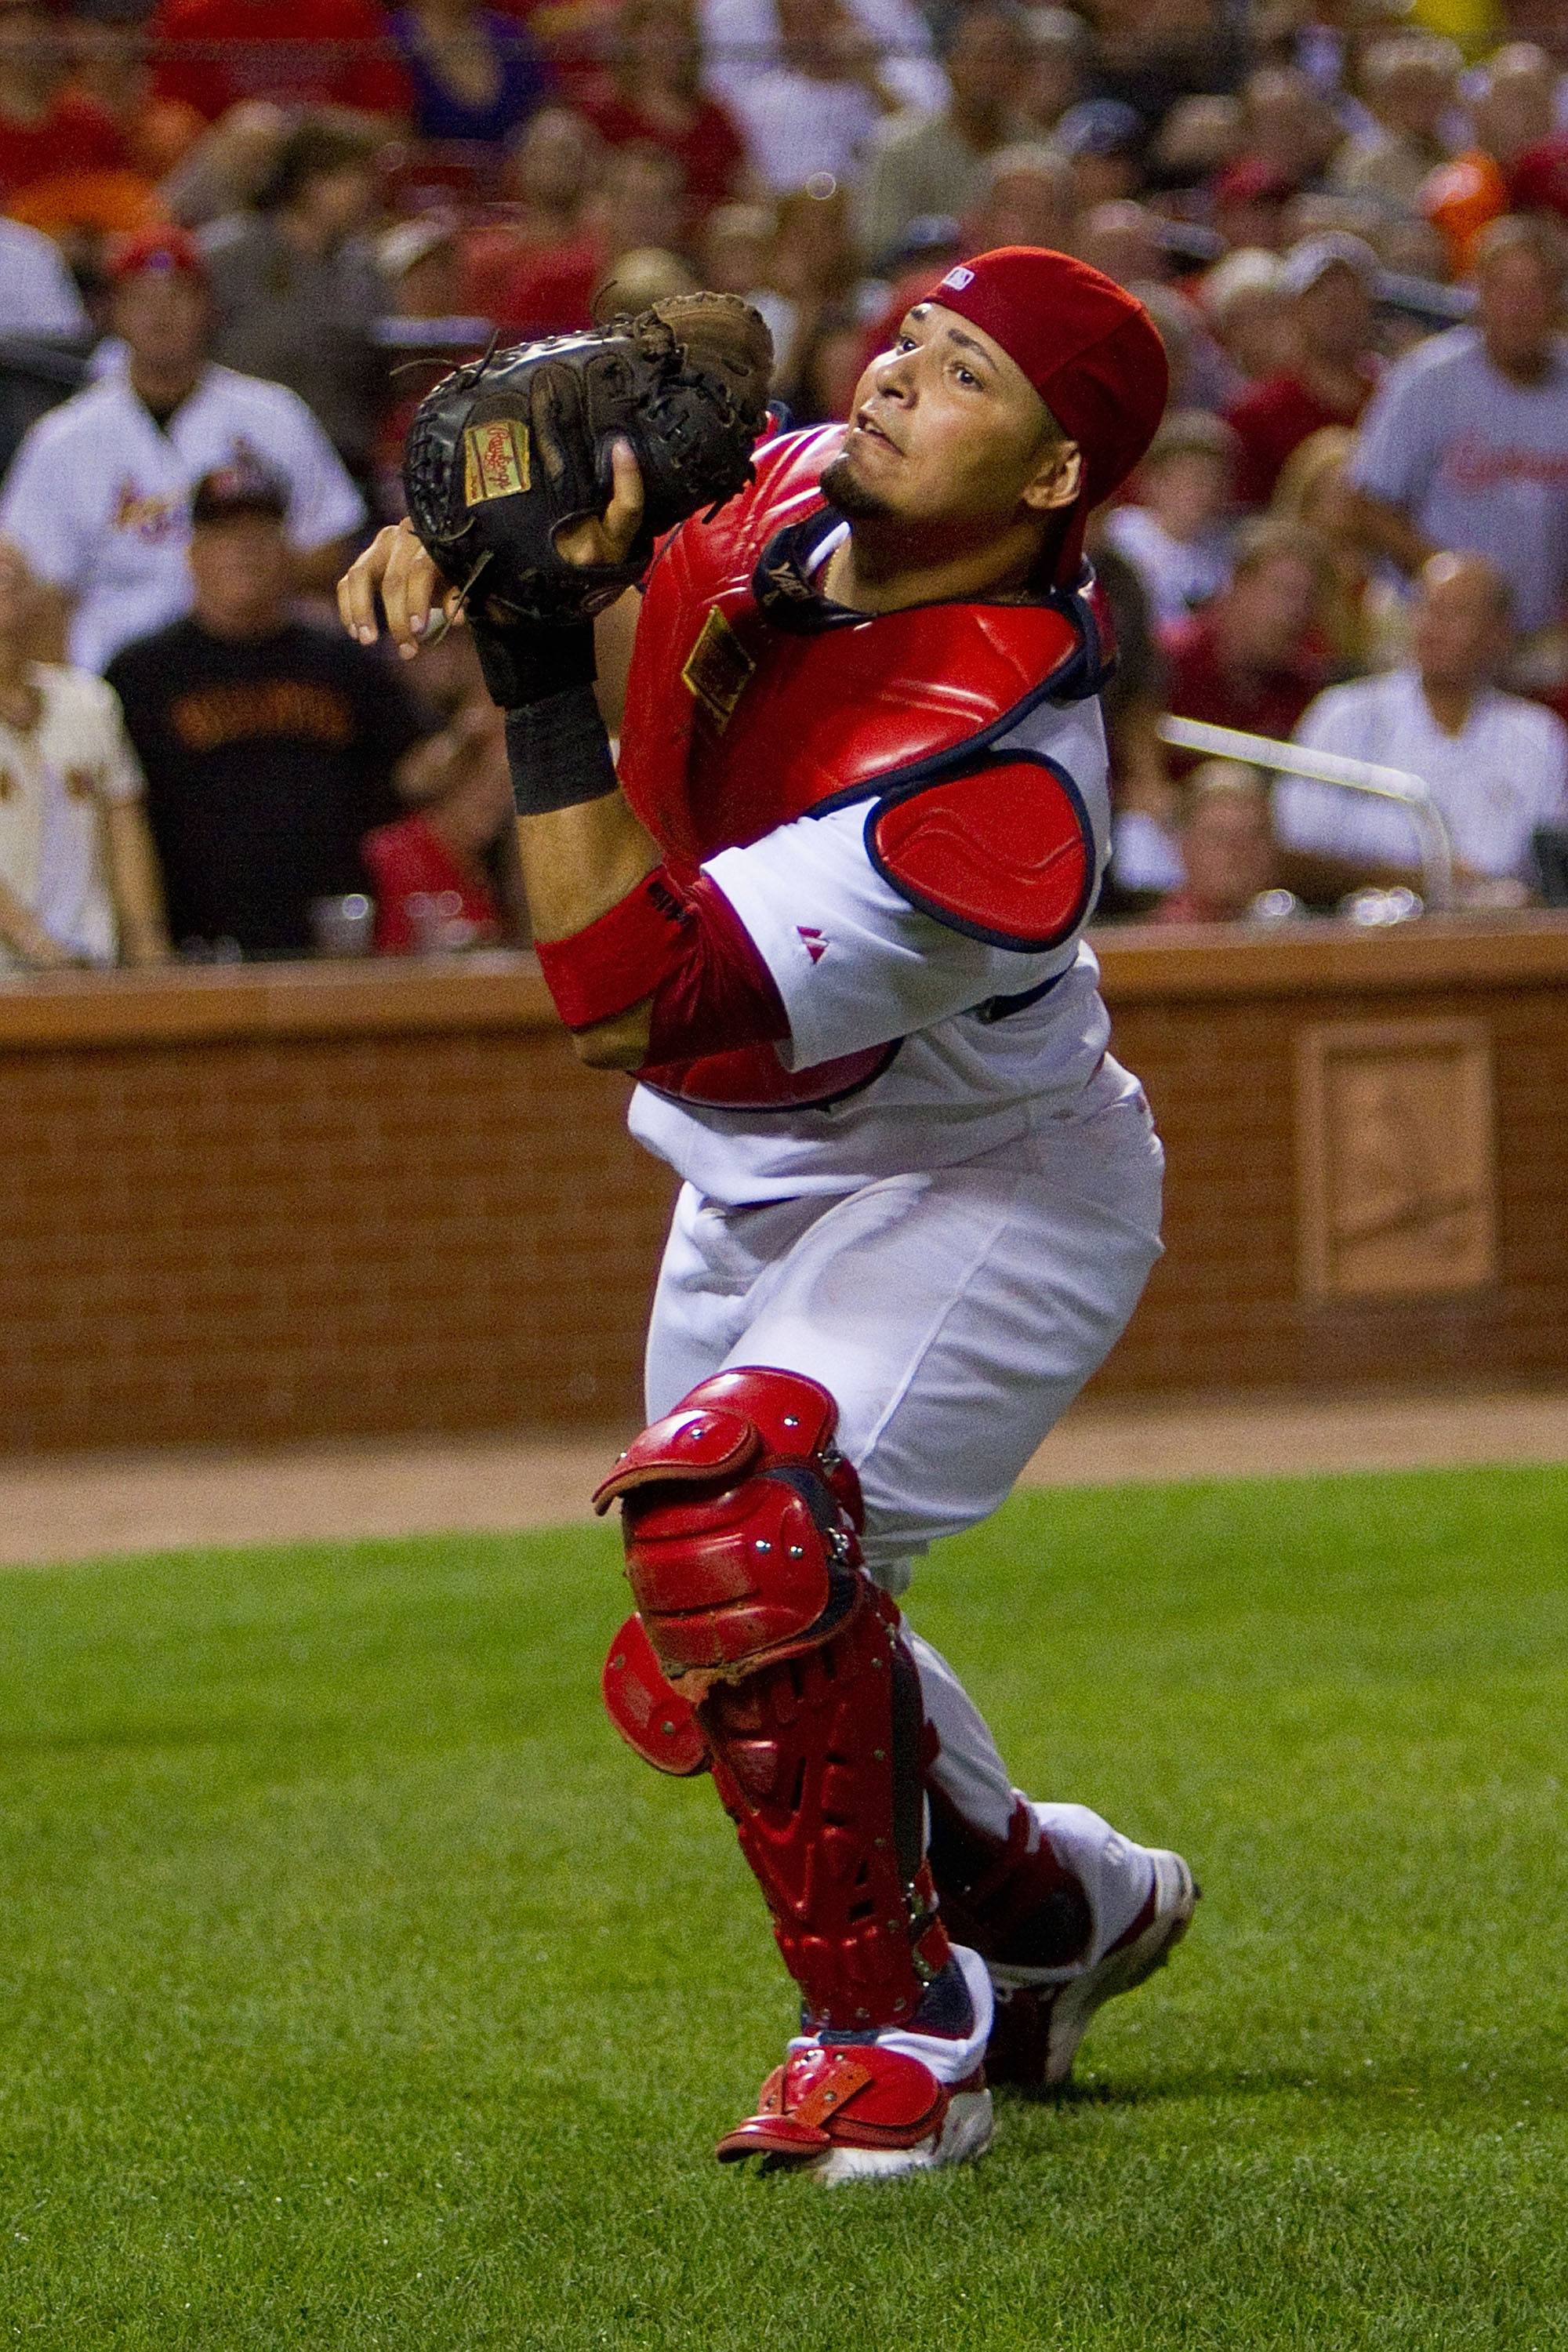 ST. LOUIS - AUGUST 21: Yadier Molina #4 of the St. Louis Cardinals catches a fly ball against the San Francisco Giants at Busch Stadium on August 21, 2010 in St. Louis, Missouri.  (Photo by Dilip Vishwanat/Getty Images)